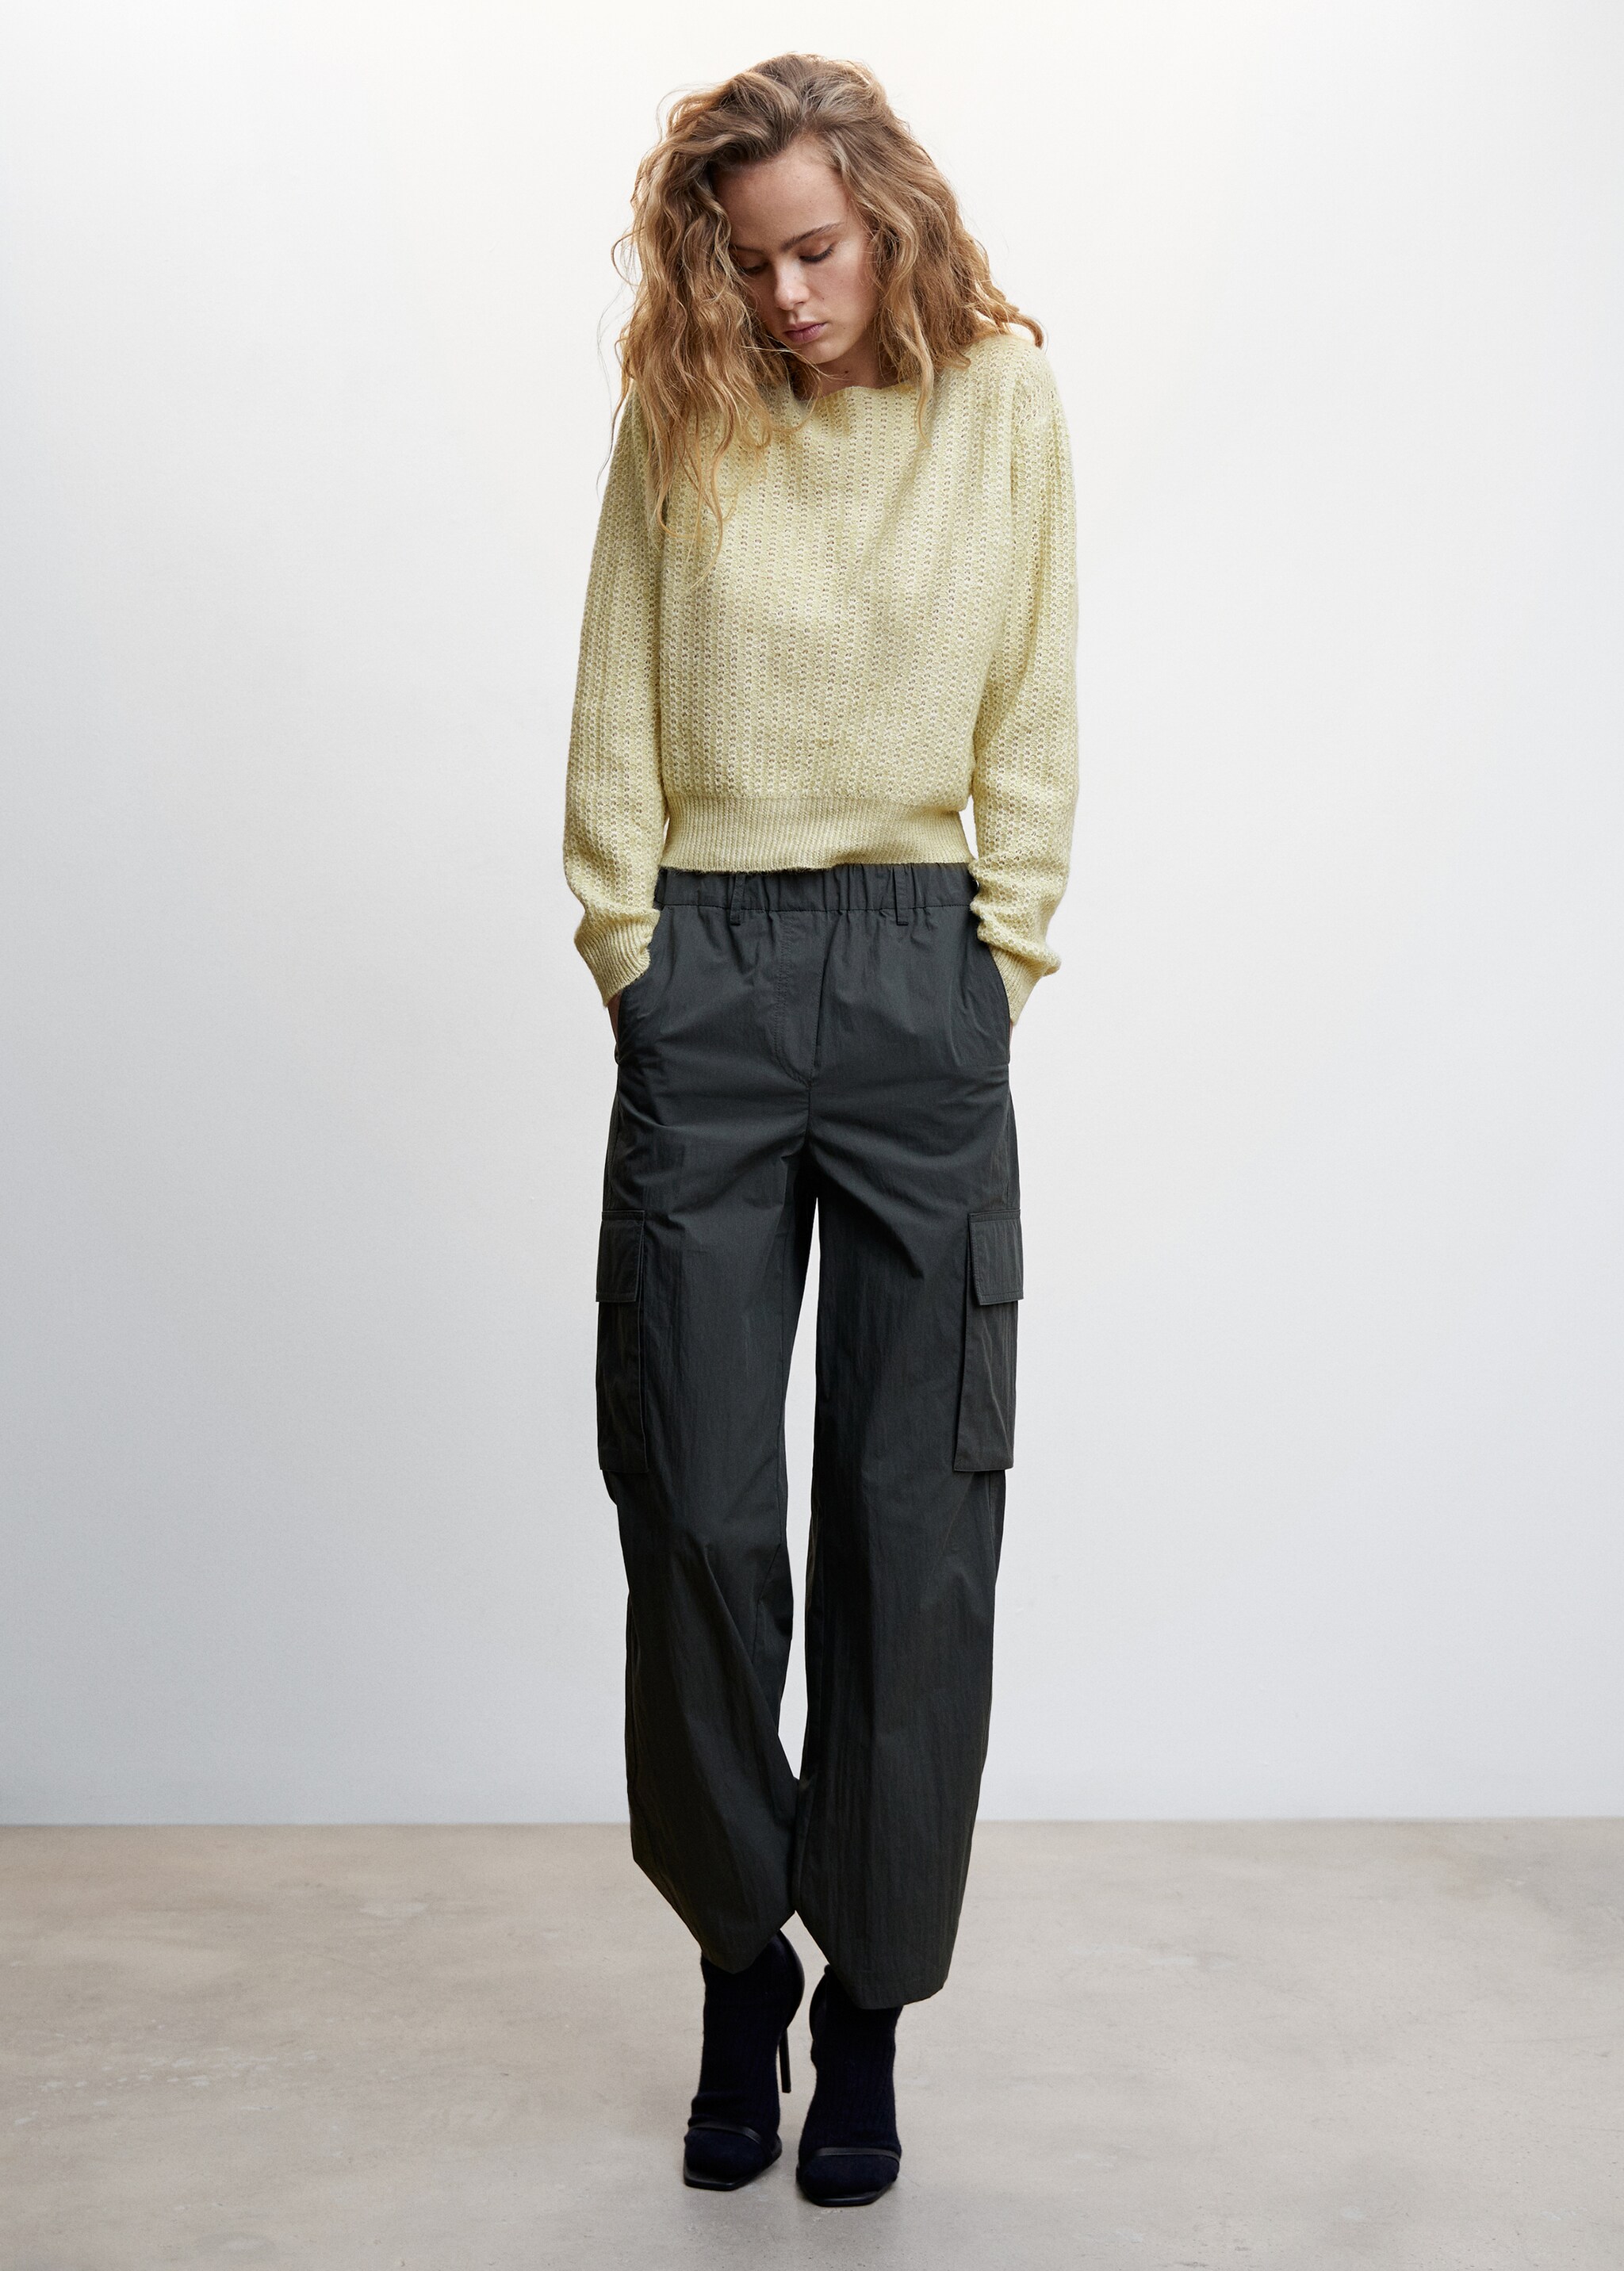 Boat-neck cropped sweater - General plane